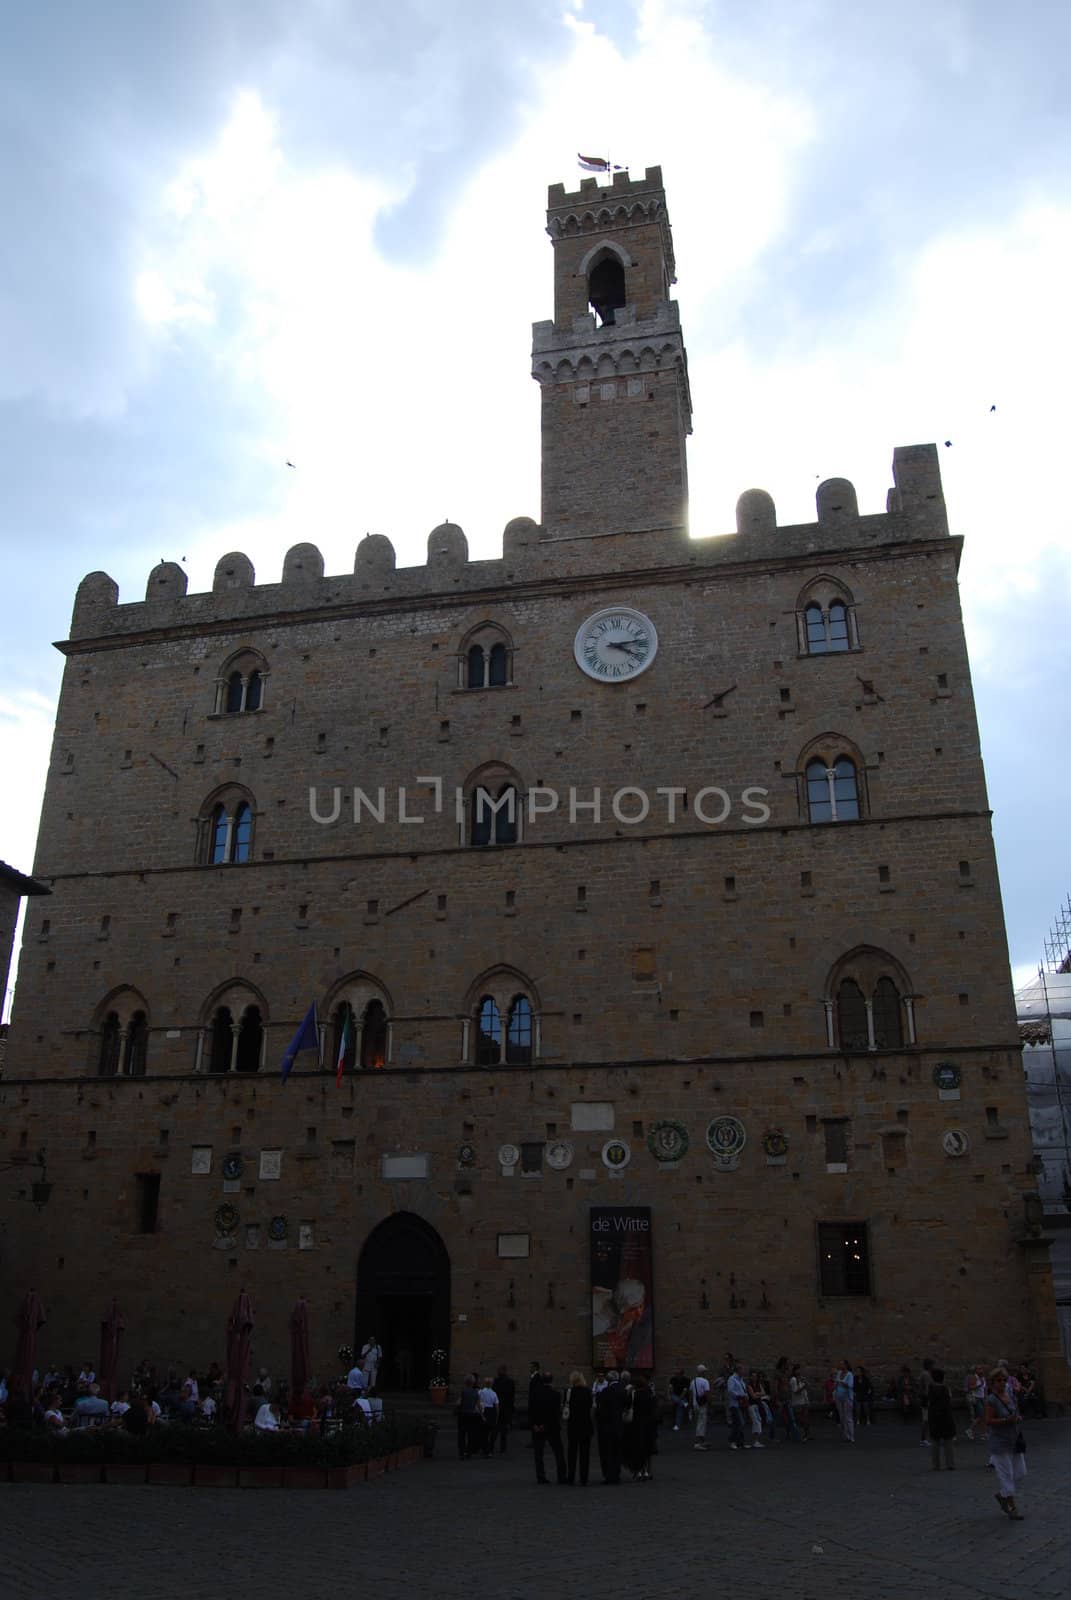 Volterra is a medieval town in Tuscany, near Pisa